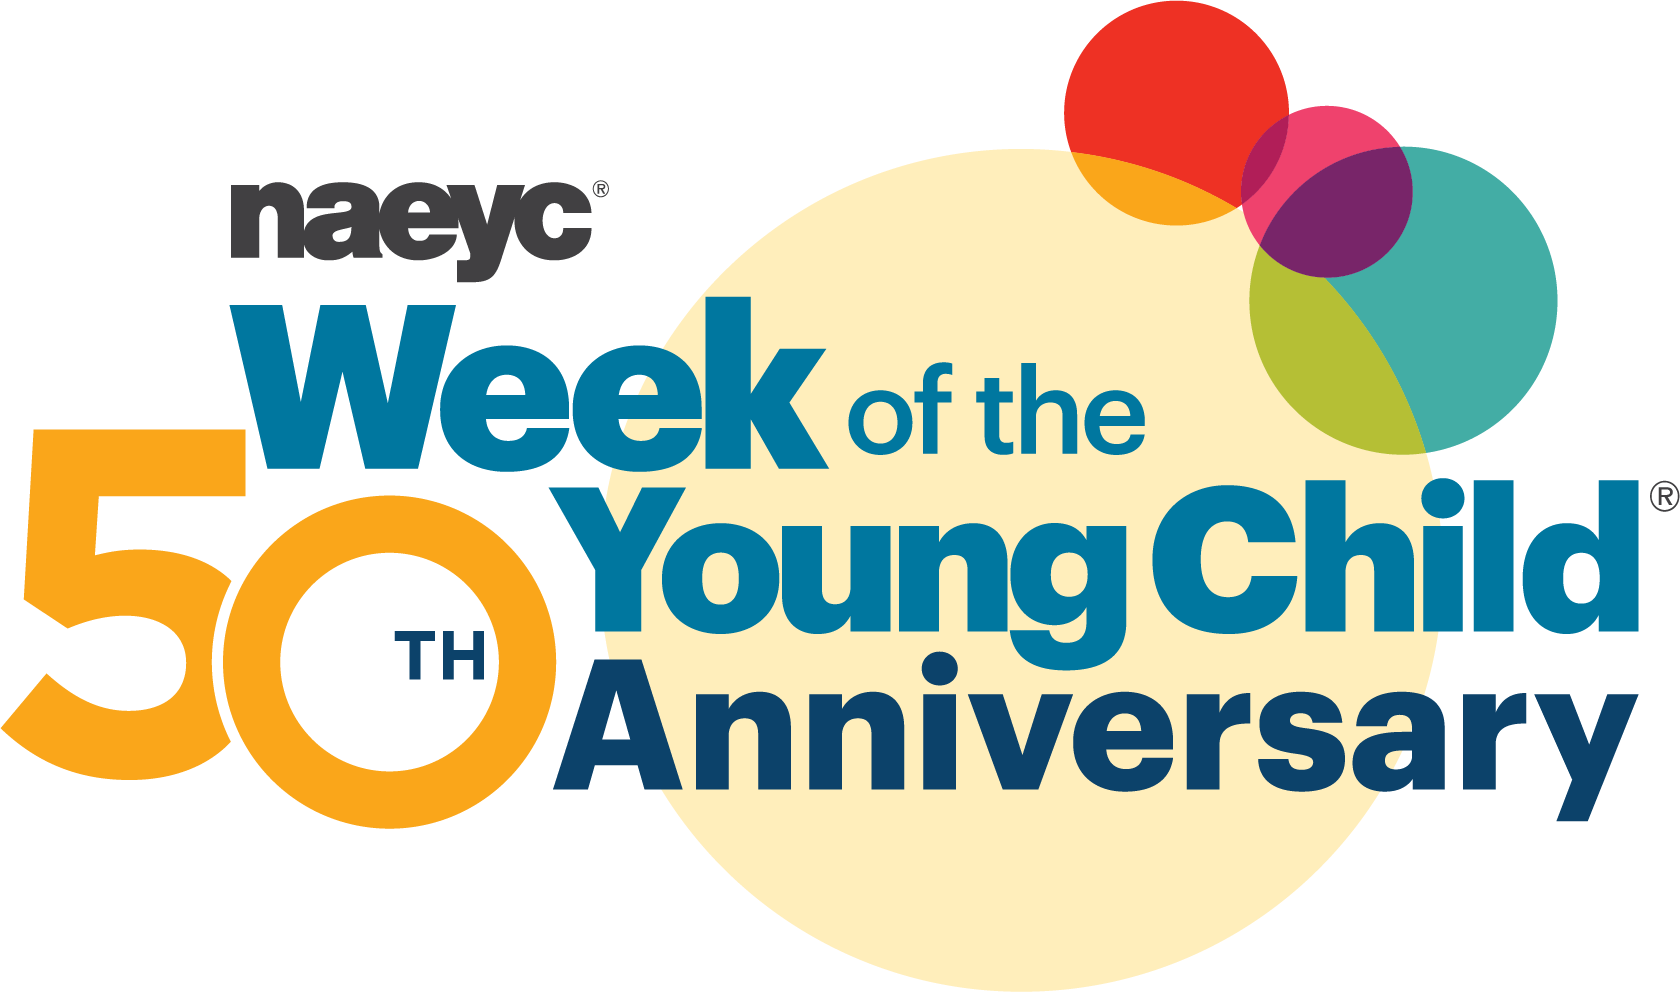 NAEYC Week of the Young Child - 50th Anniversay